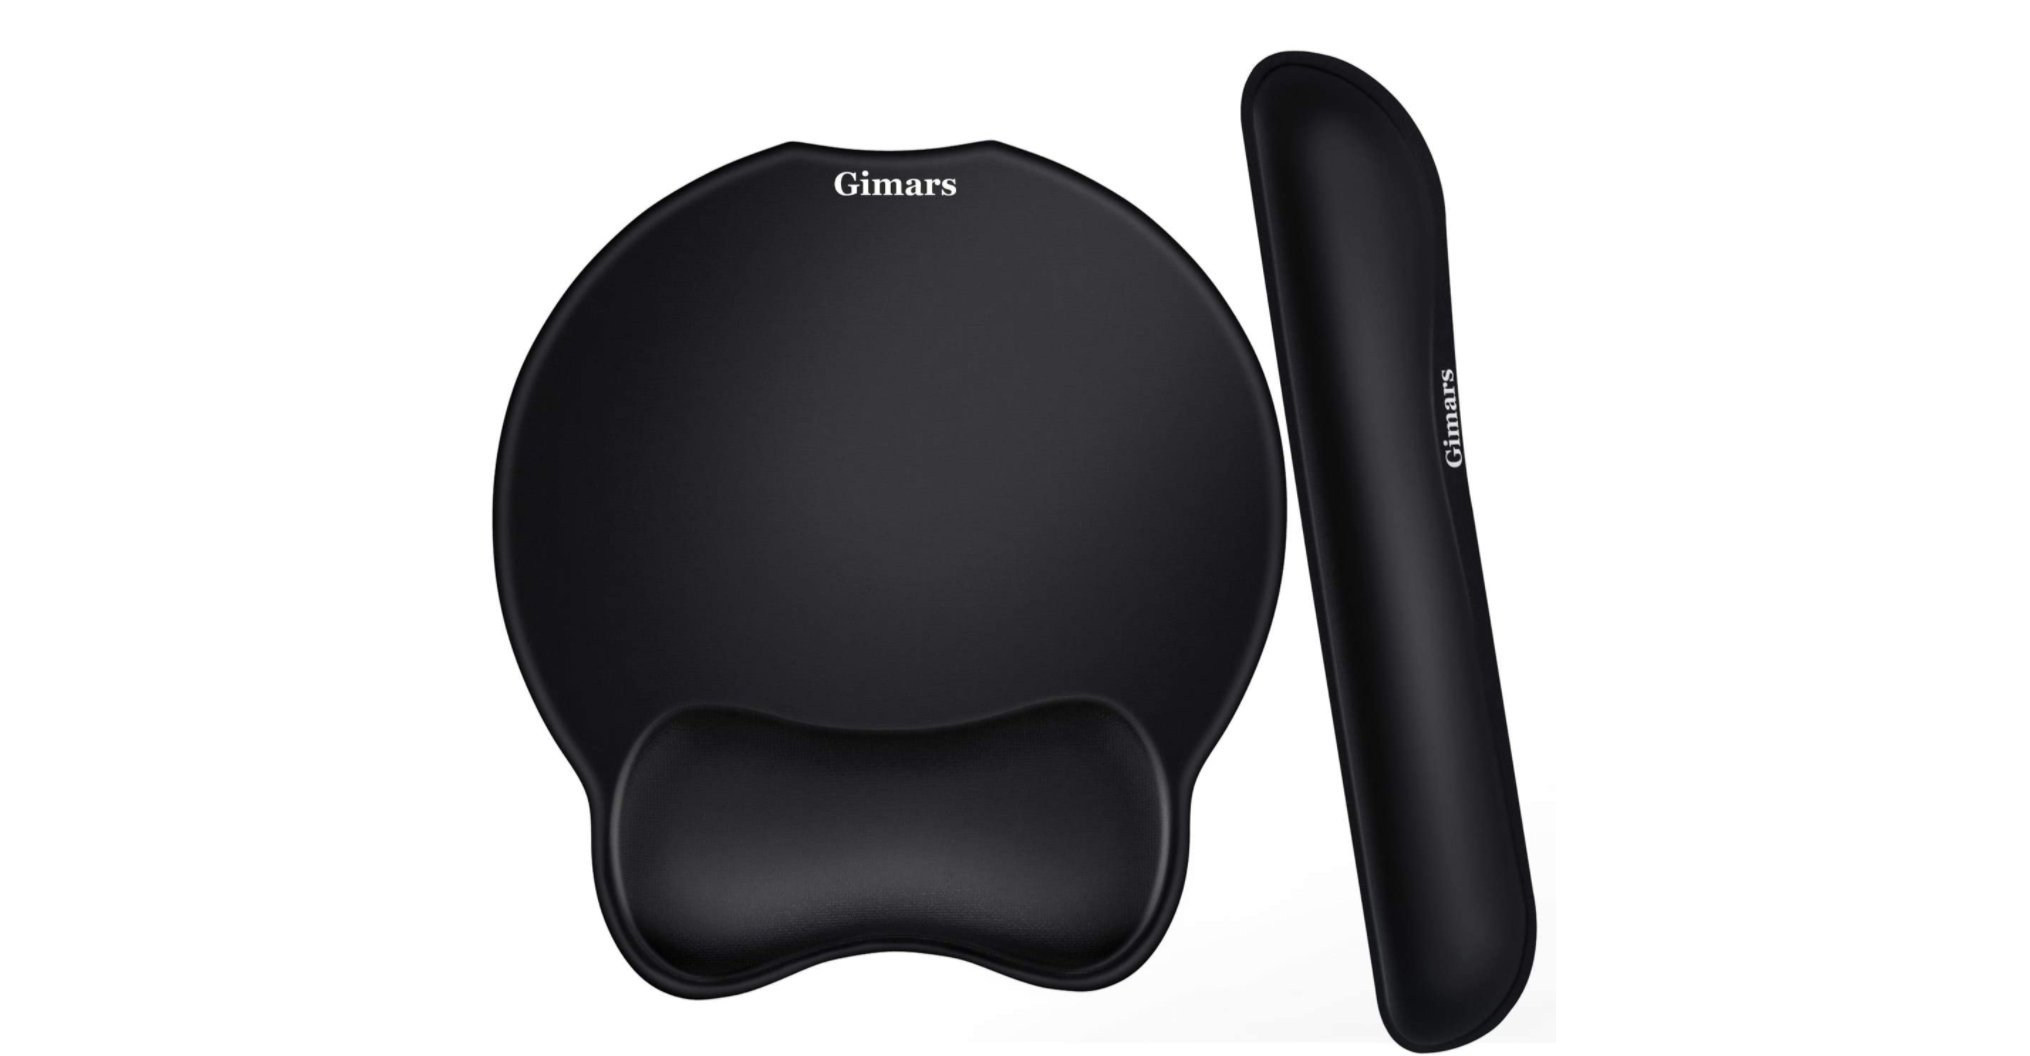 Gimars Ergonomic Mouse Pad and Keyboard Rest